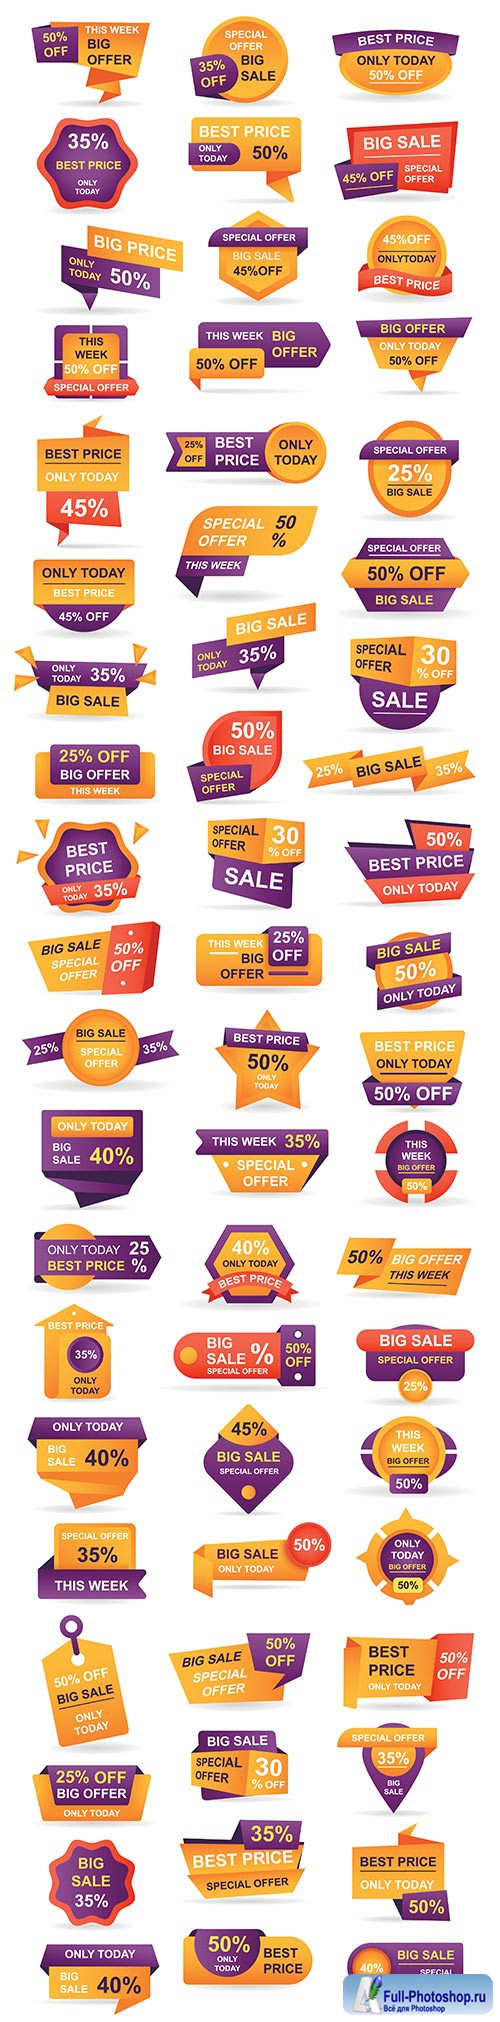 Stickers best offer price and big sale pricing tag 